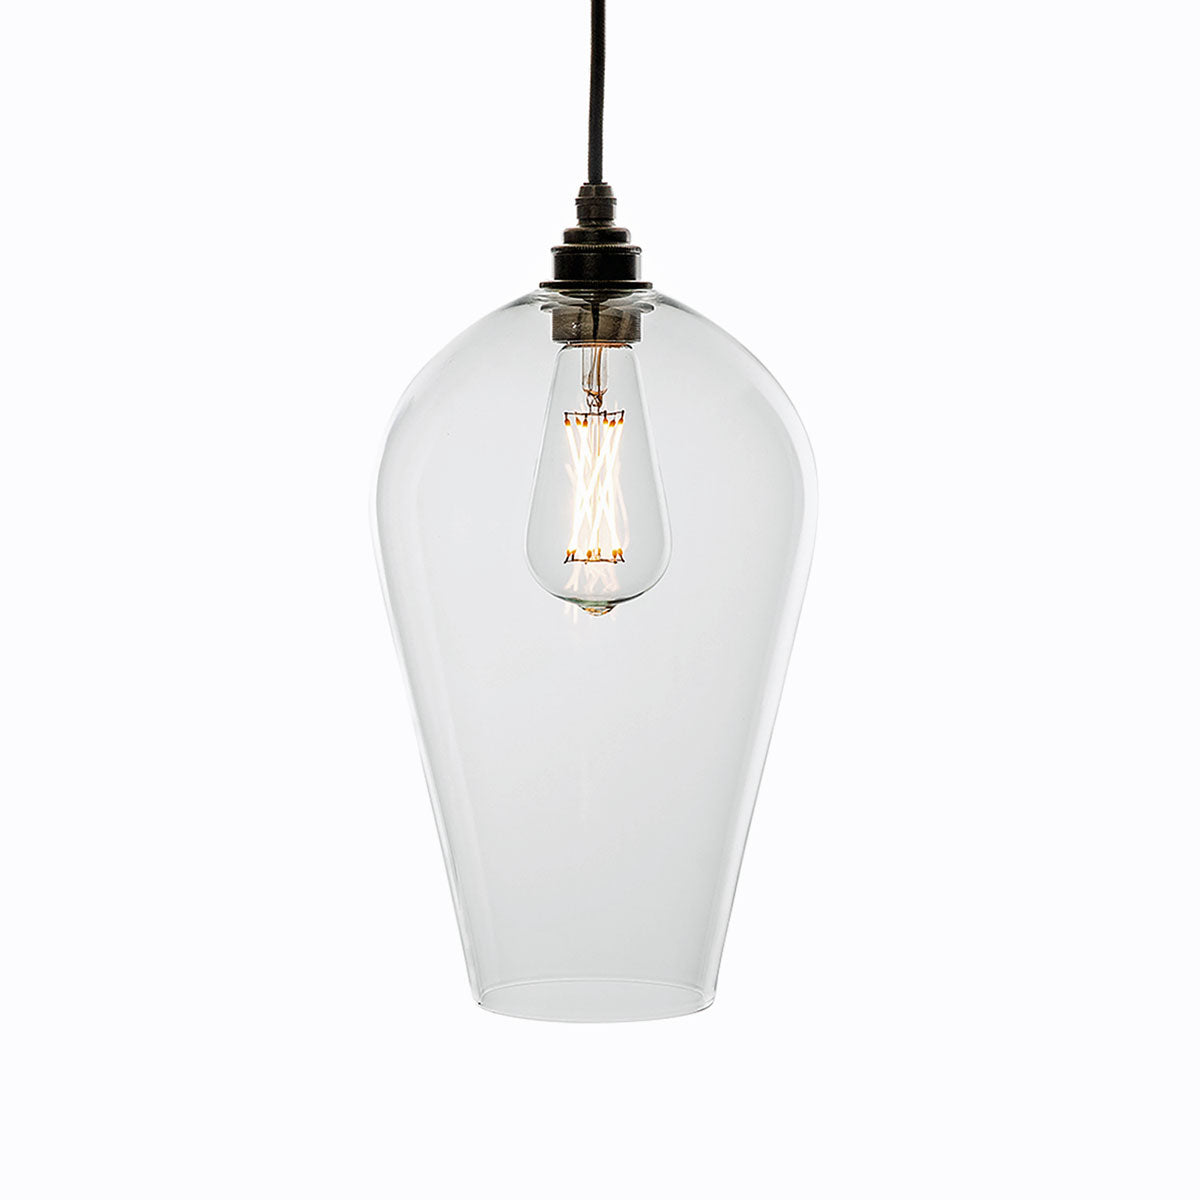 Clear glass version of the Waterloo pendant light sold by South Charlotte Fine Lighting